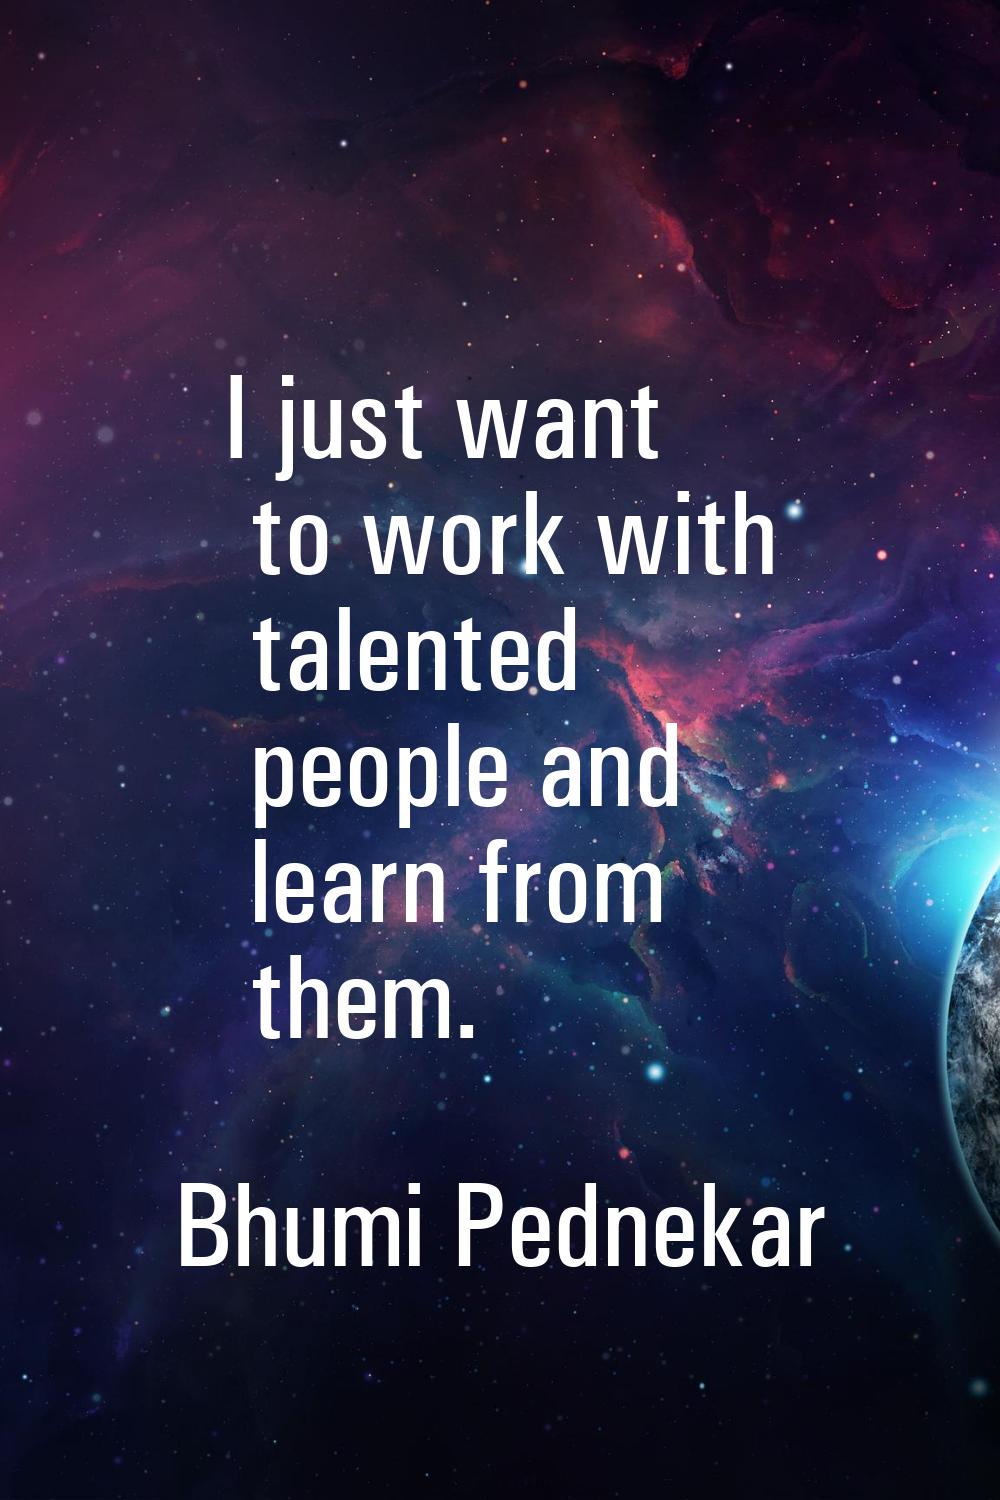 I just want to work with talented people and learn from them.